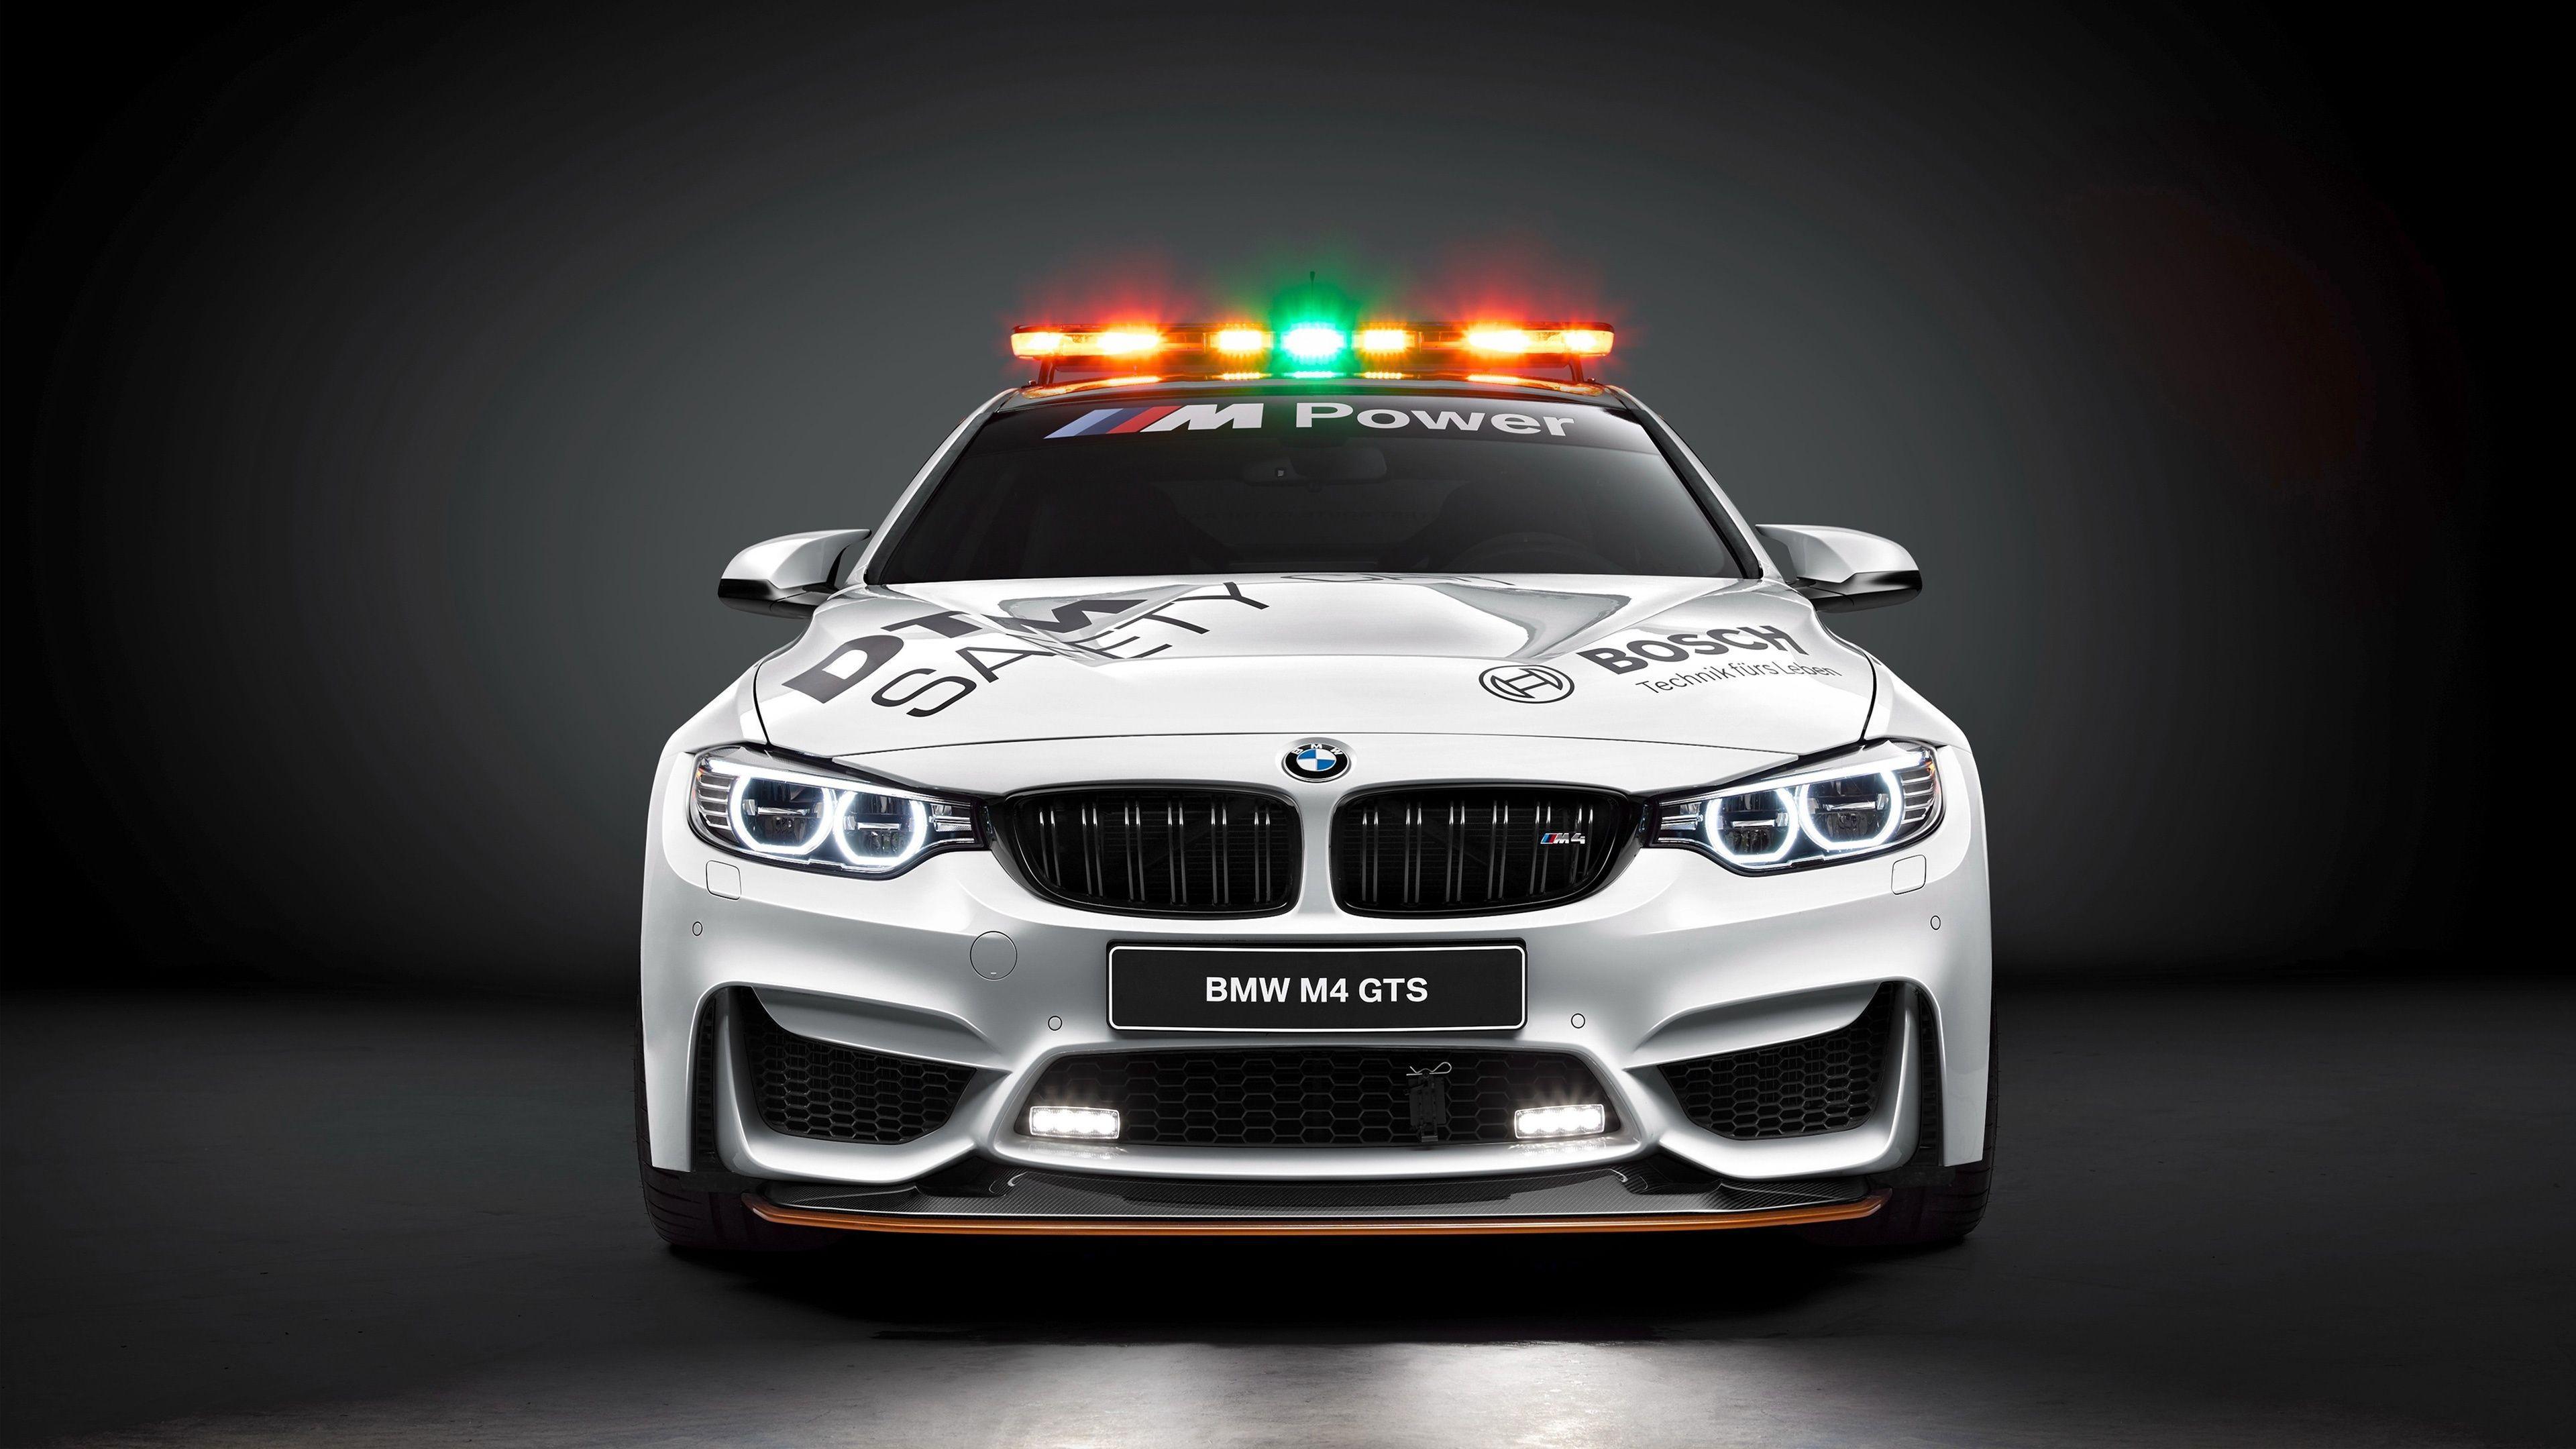 BMW M4 GTS Safety Car Wallpaper in jpg format for free download